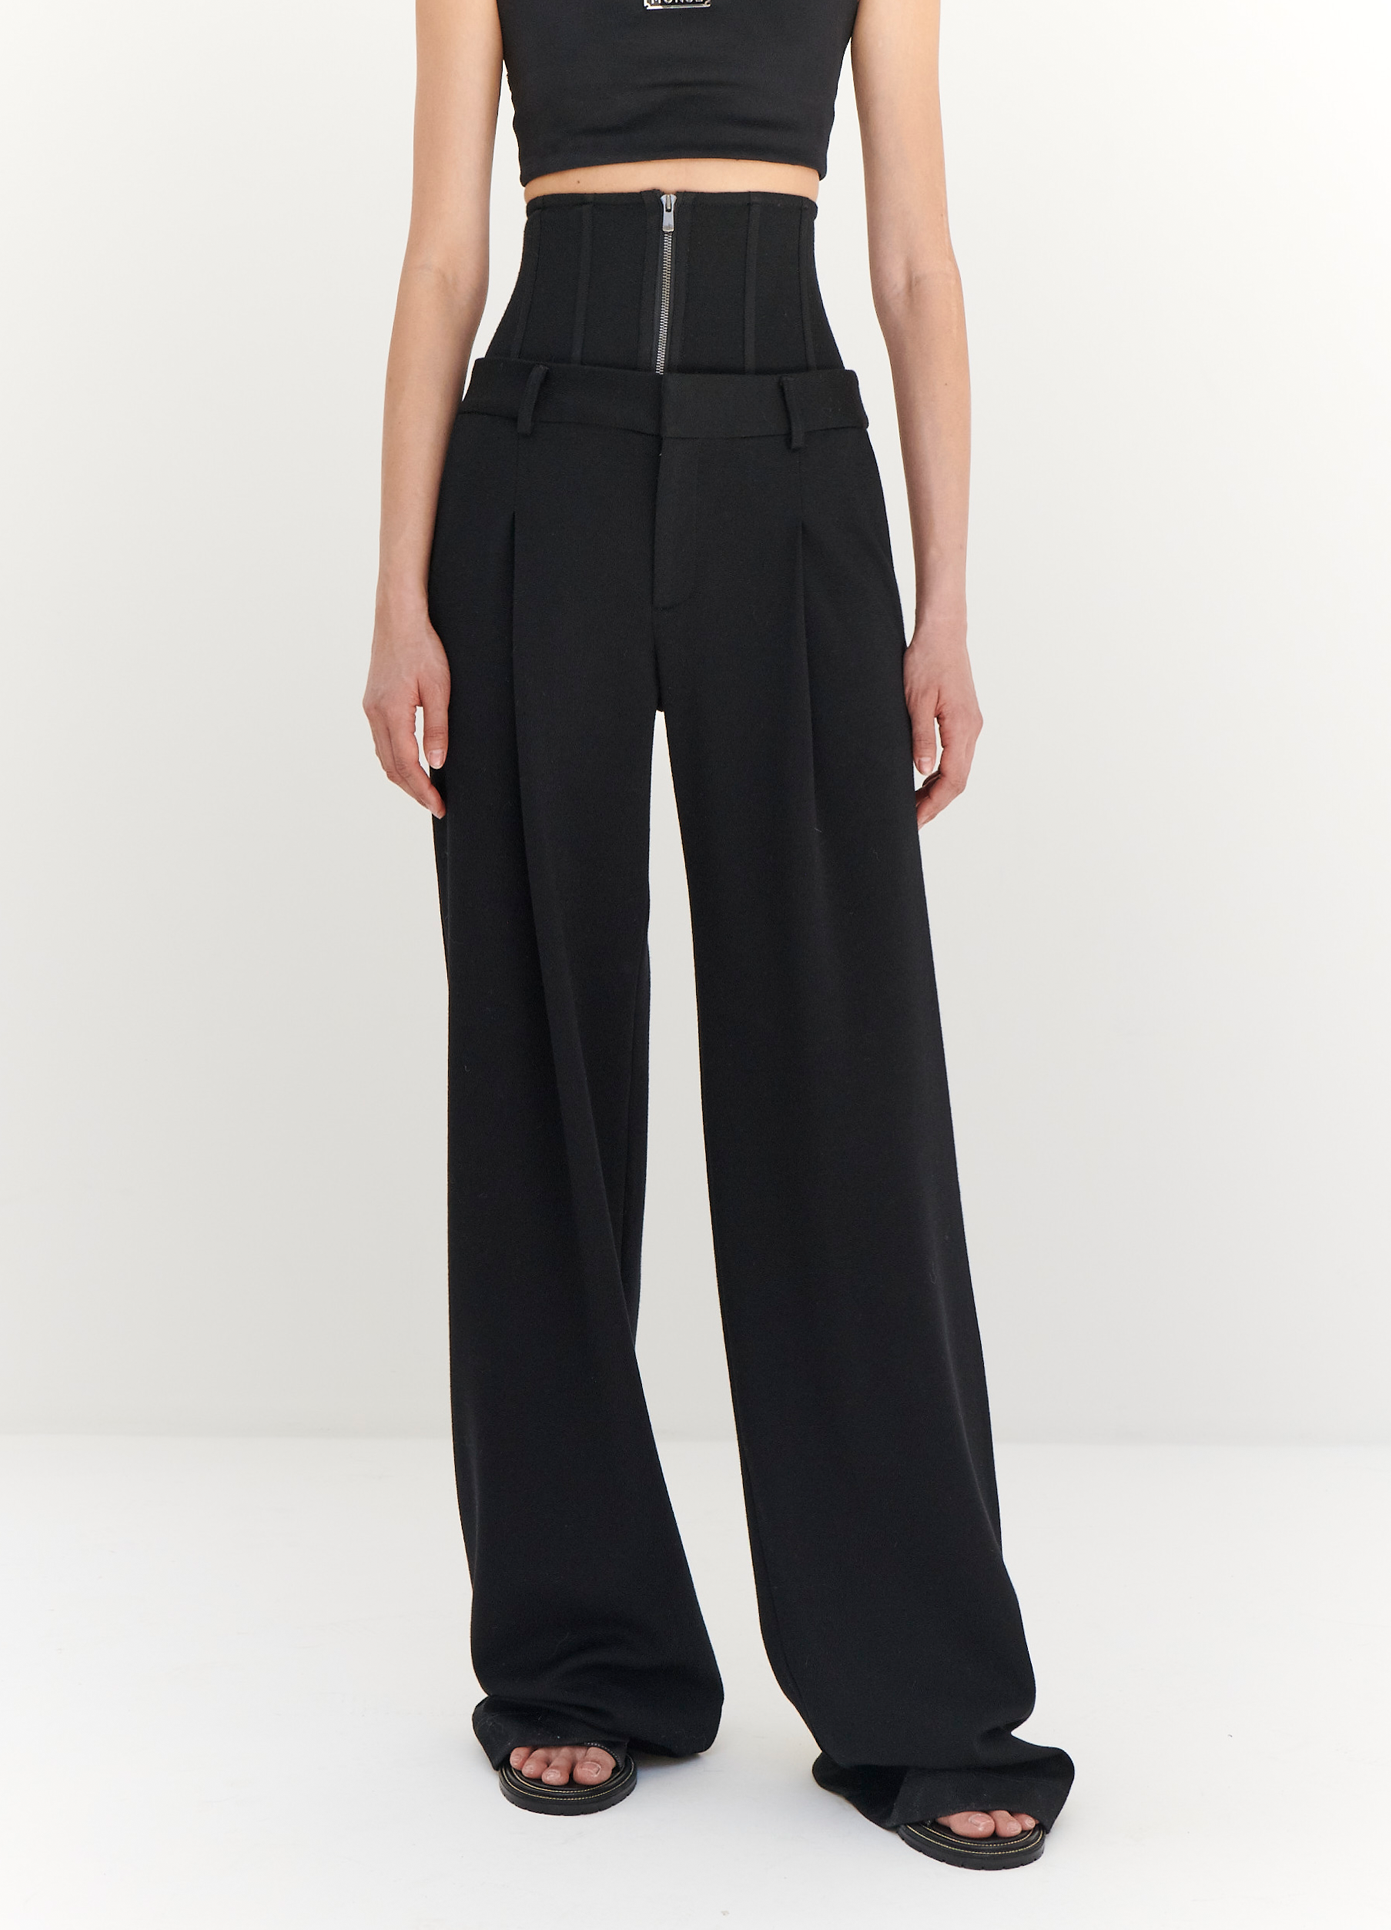 MONSE Jersey Bustier Trousers in Black on model front view